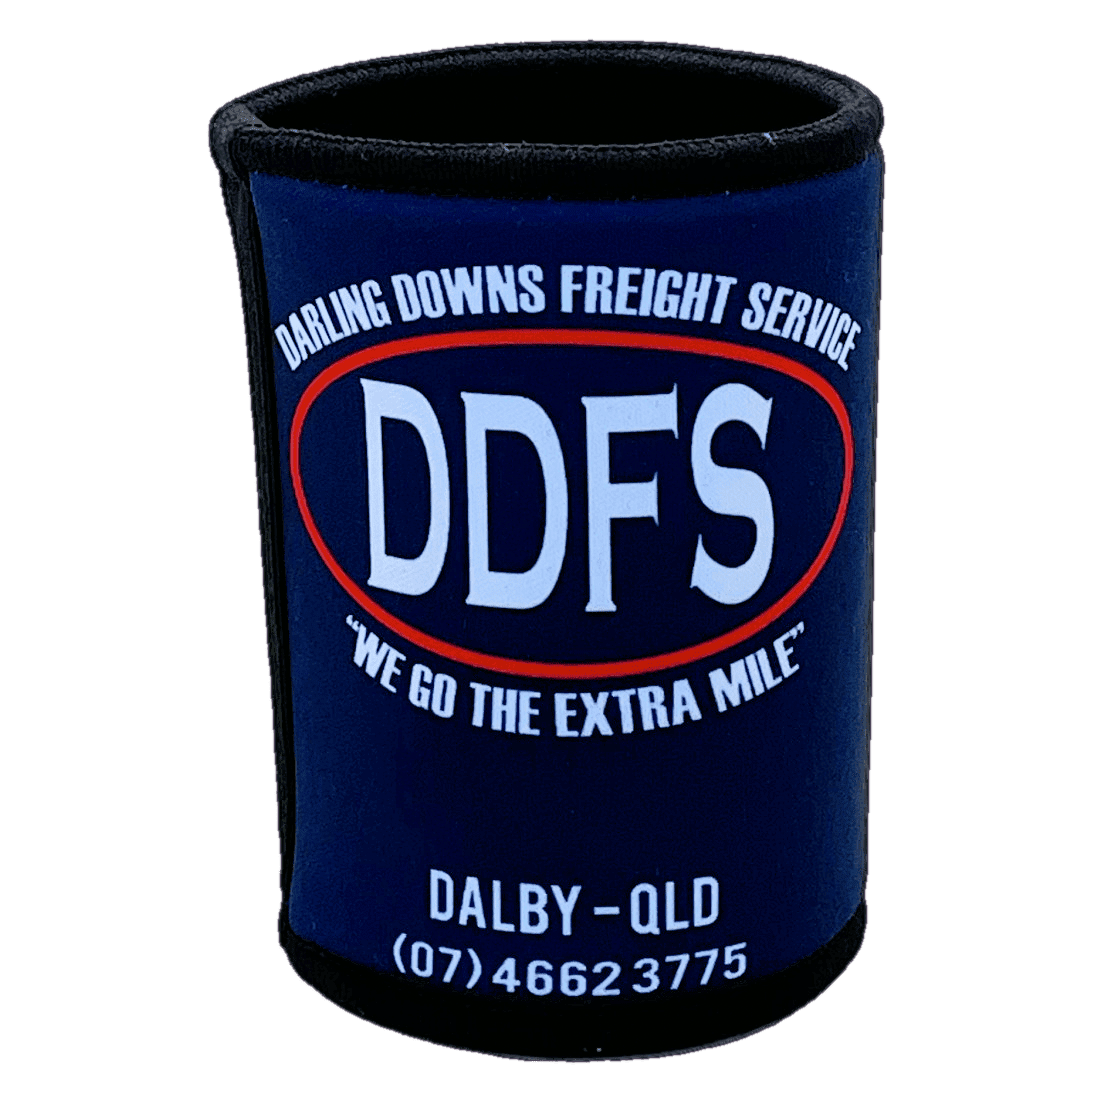 Darling Downs Freight Service Custom Stubby Holder